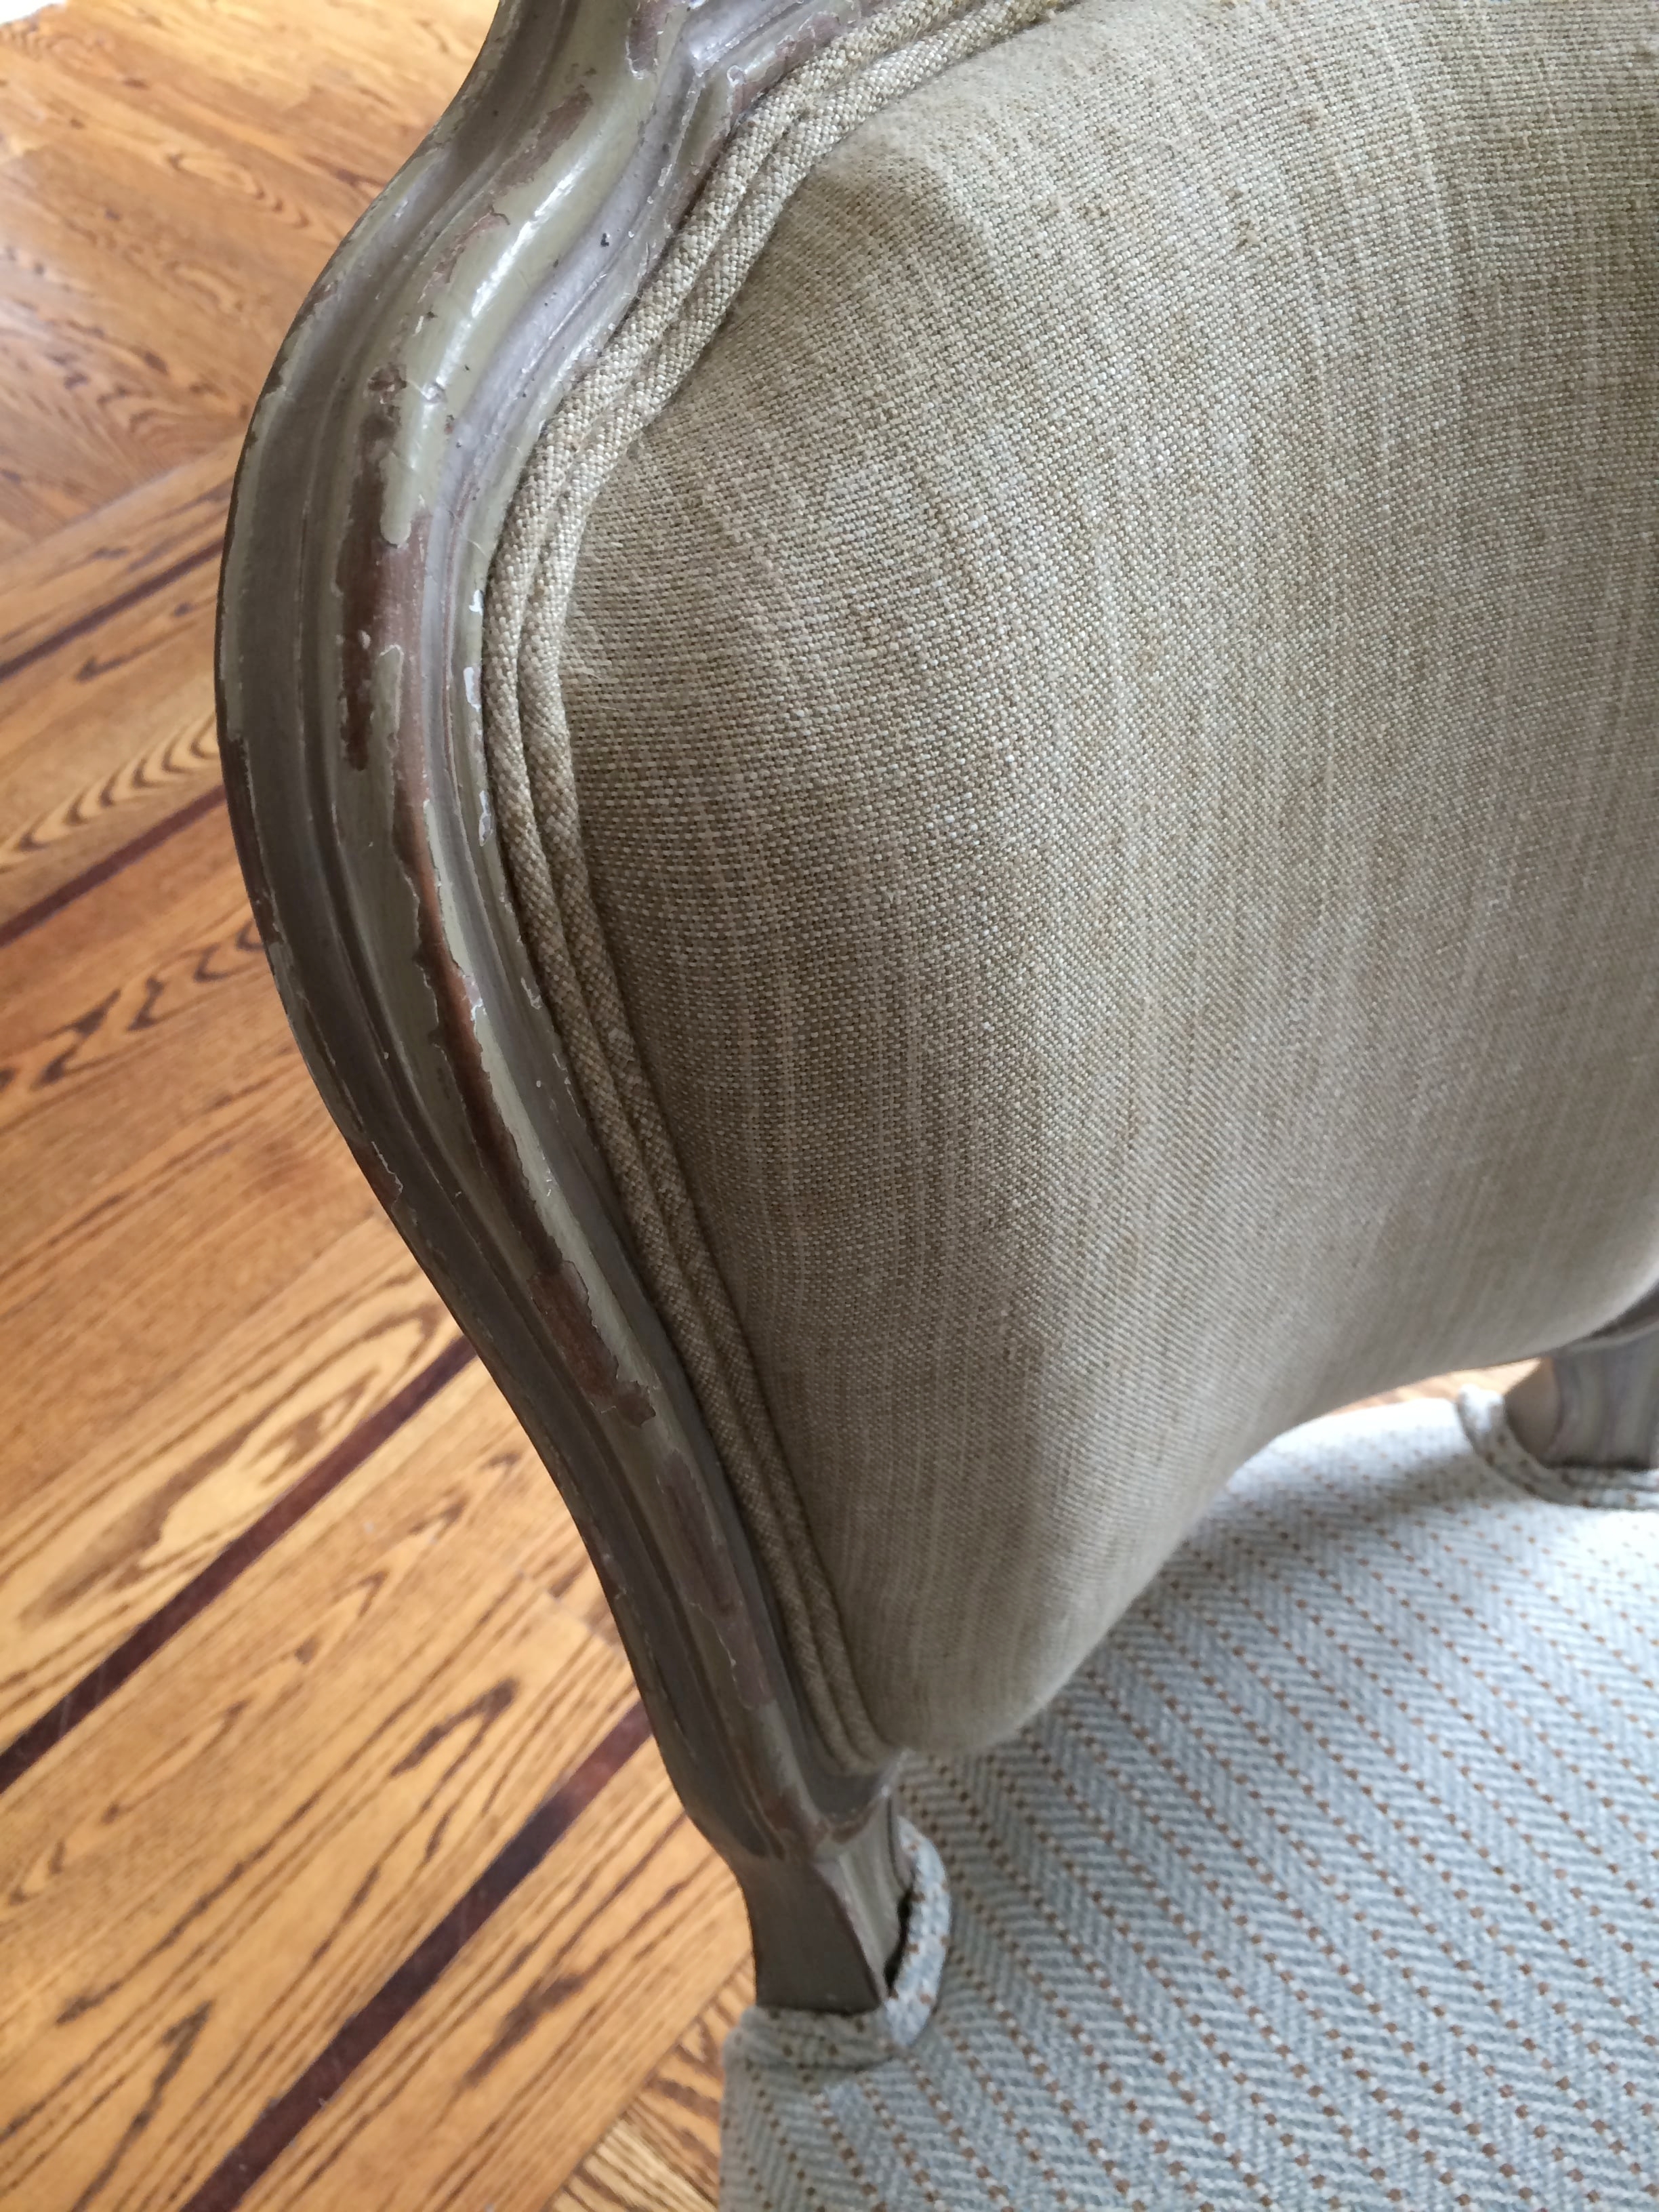 Constrating textures can update beautiful antique chairs and give much visual interest.